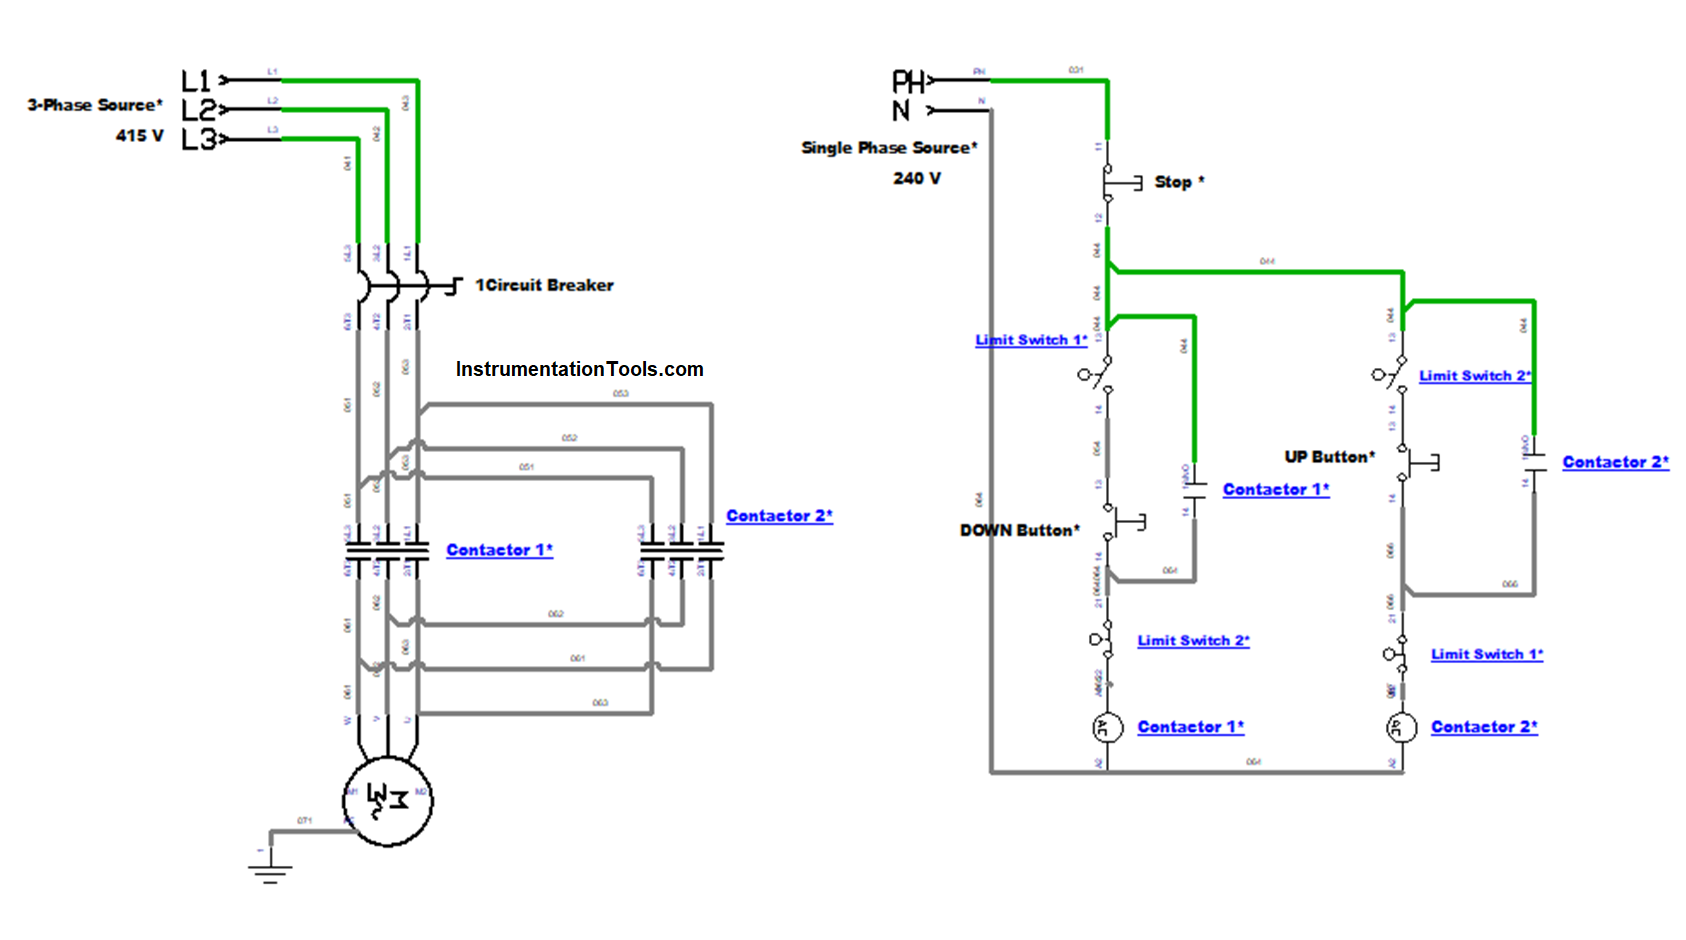 Shutter Door Control using Induction Motor and Limit Switches